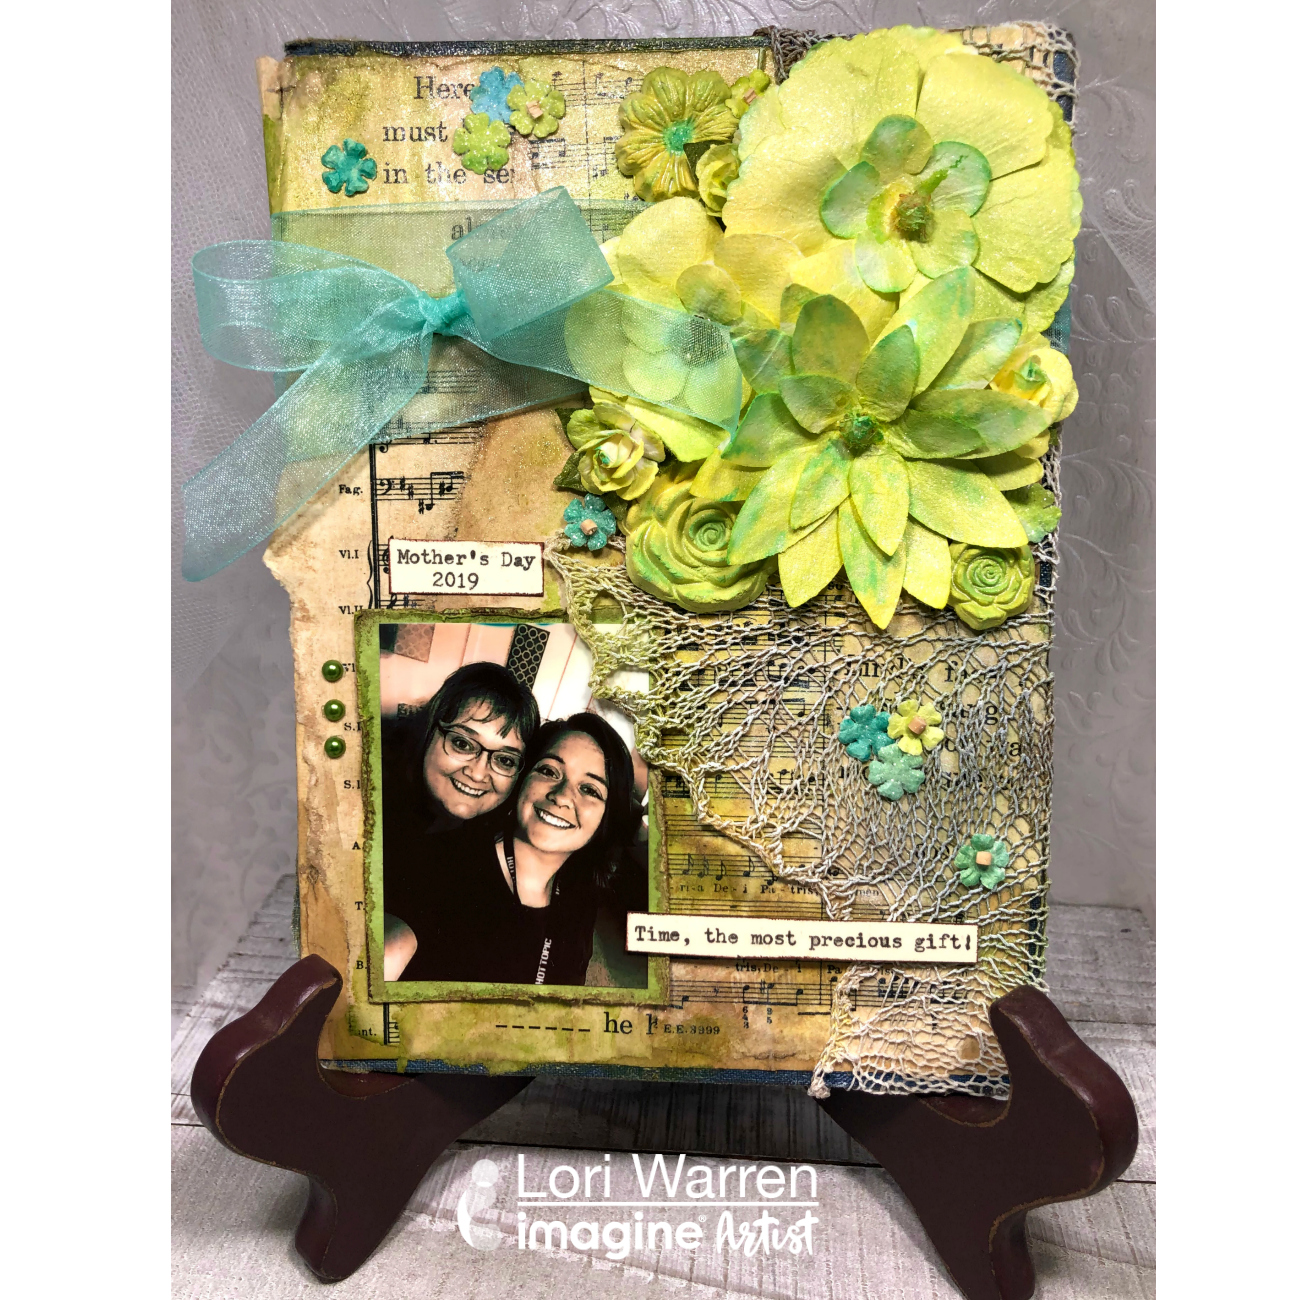 Handmade Mother's Day Memory board in bright greeens made by applying mixed media techniques to a book cover.